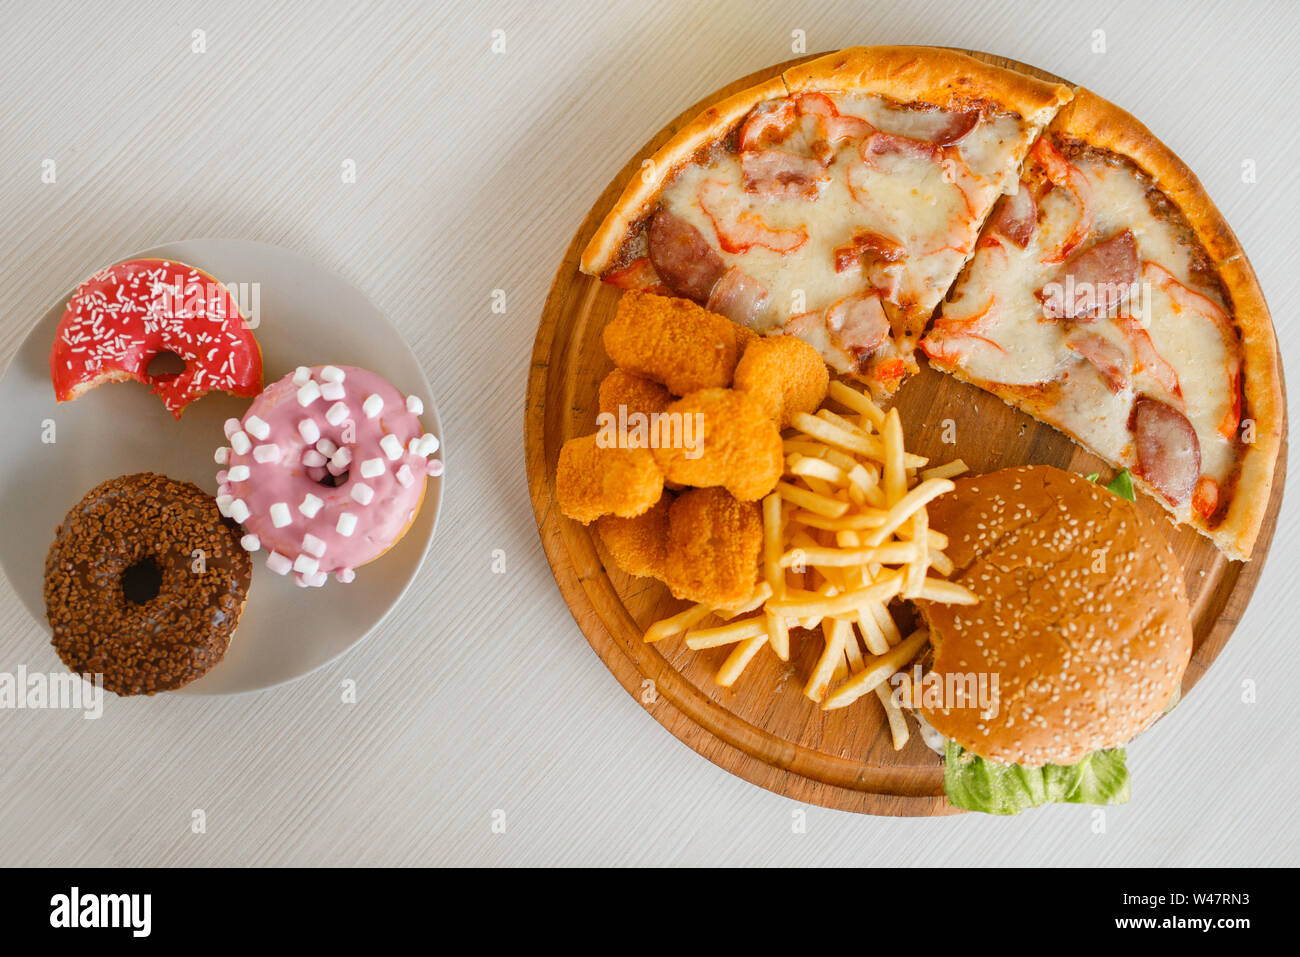 High calorie food on the table, top view, nobody. Pizza and burger, doughnuts, french fries and chicken nuggets. Junk fastfood Stock Photo